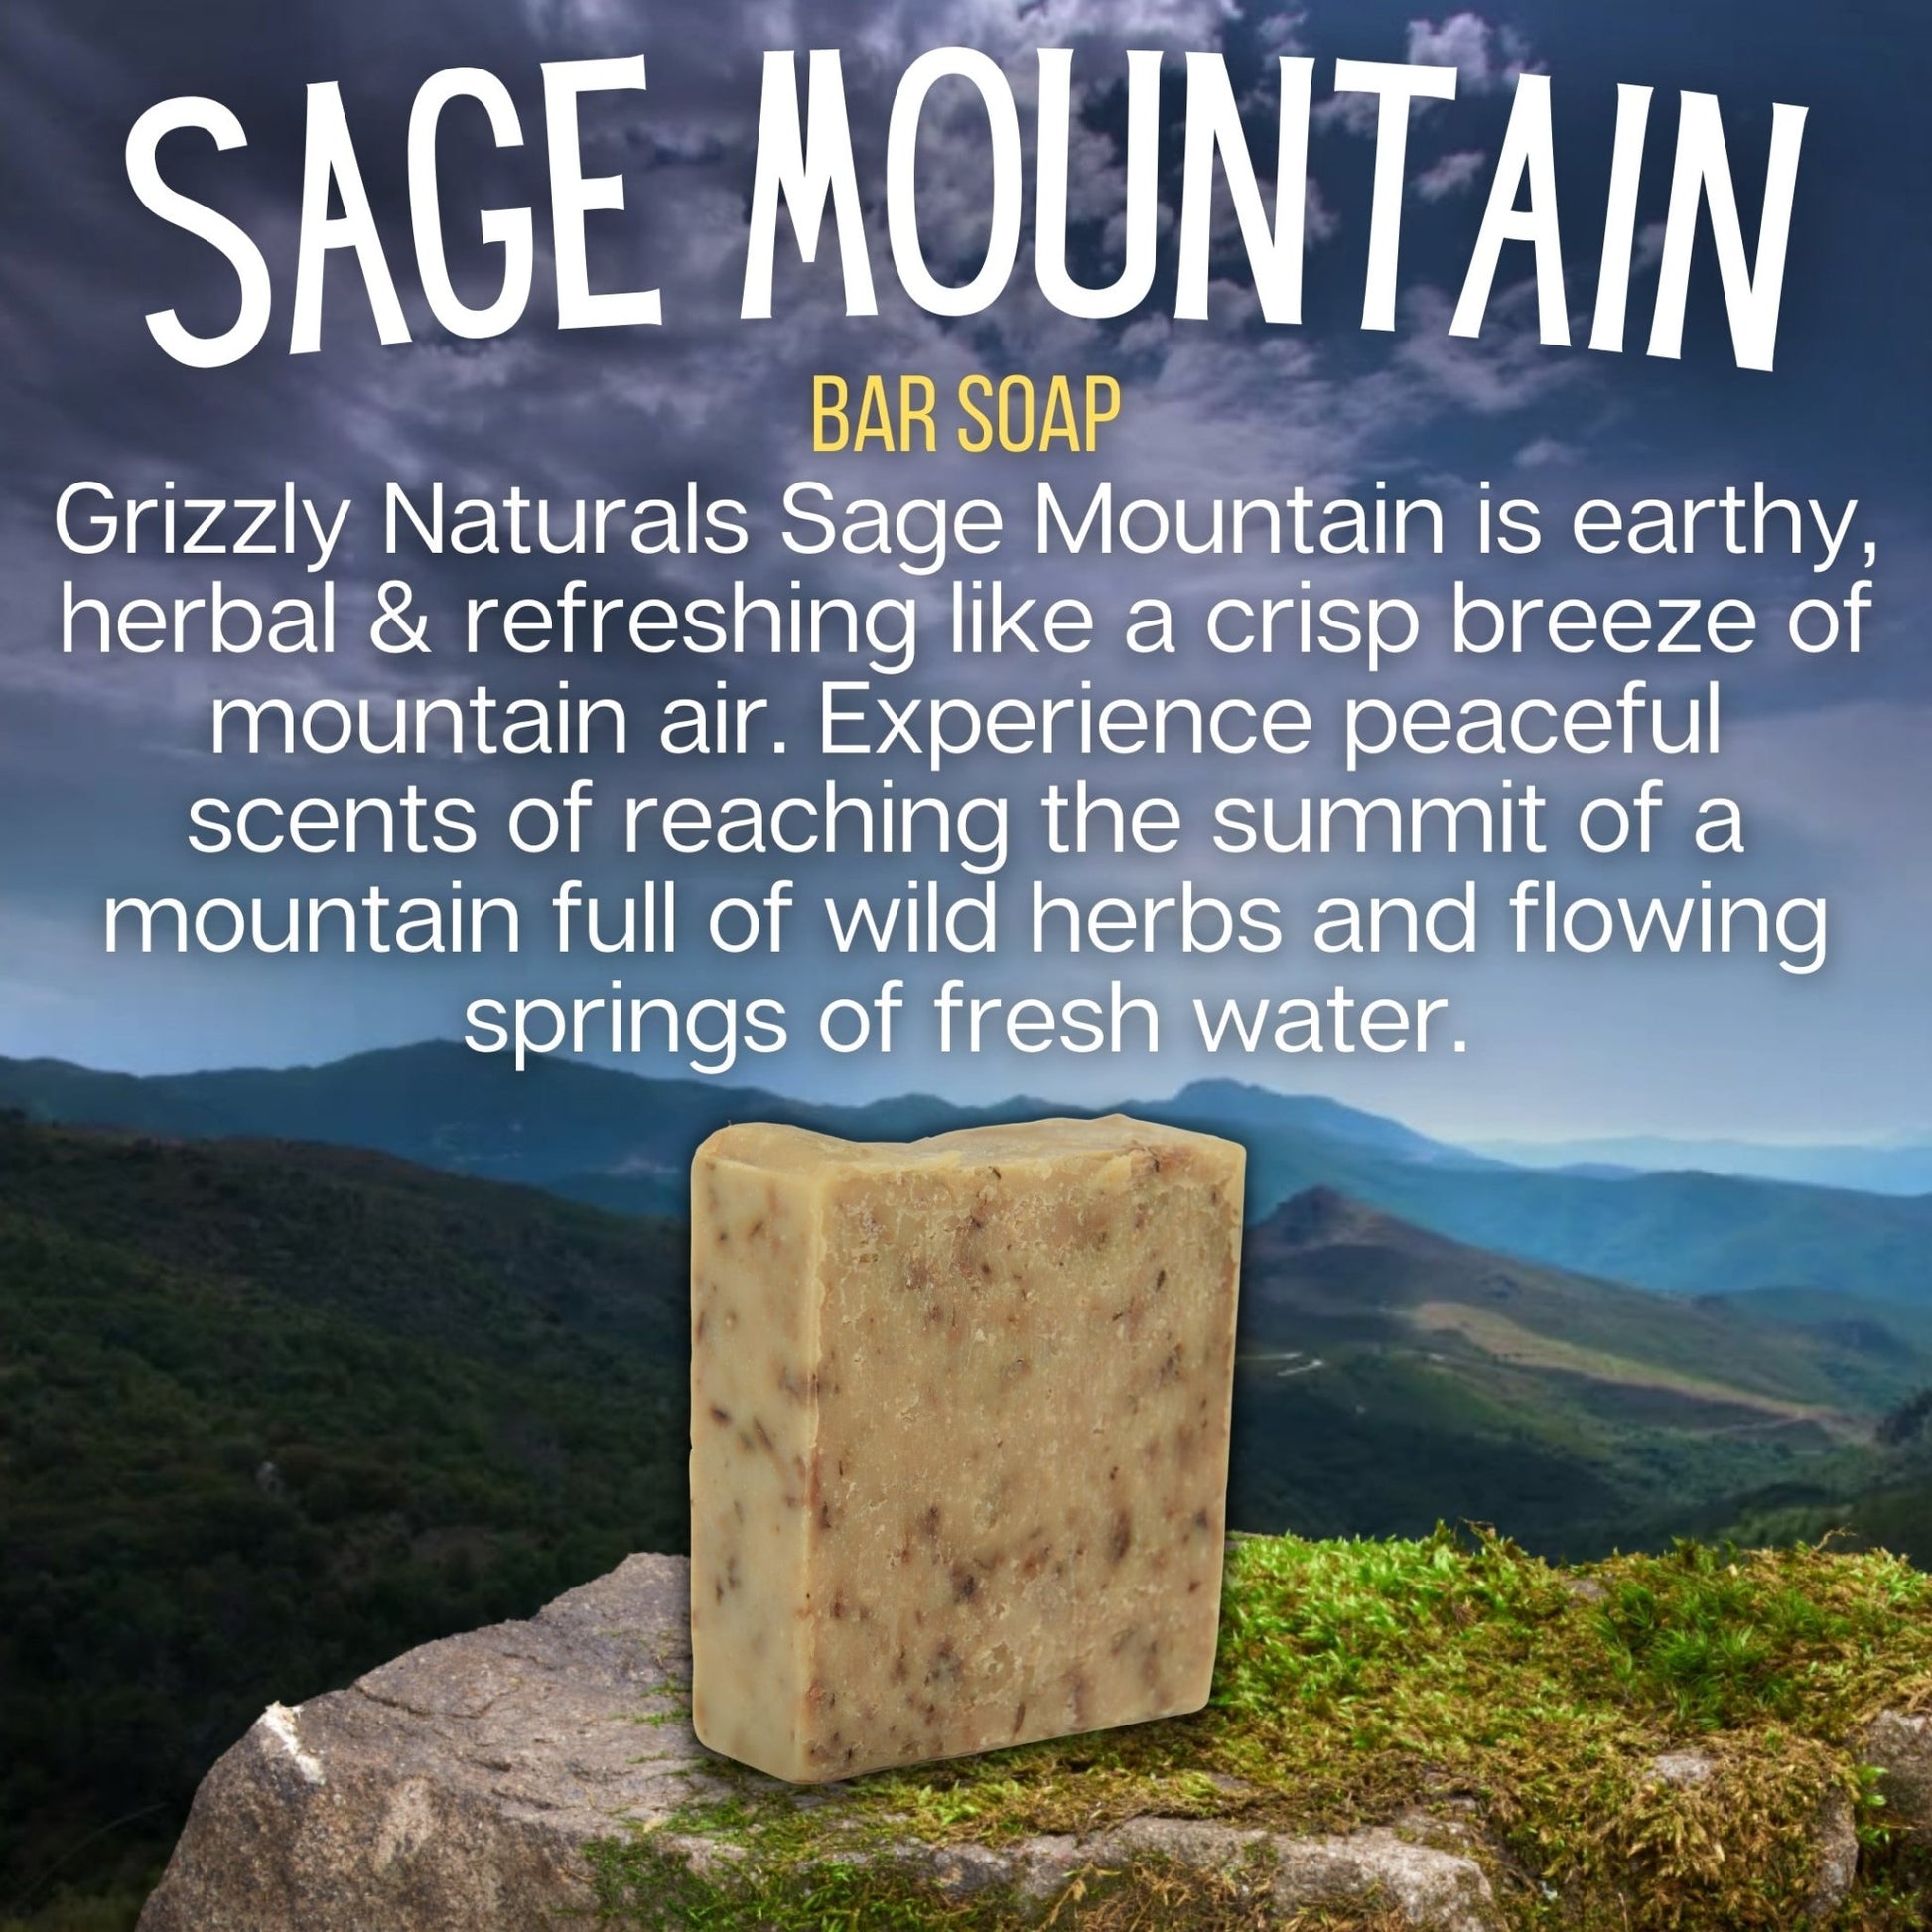 Sage Mountain - BAR SOAP - Medium Grit - Grizzly Naturals Soap Company